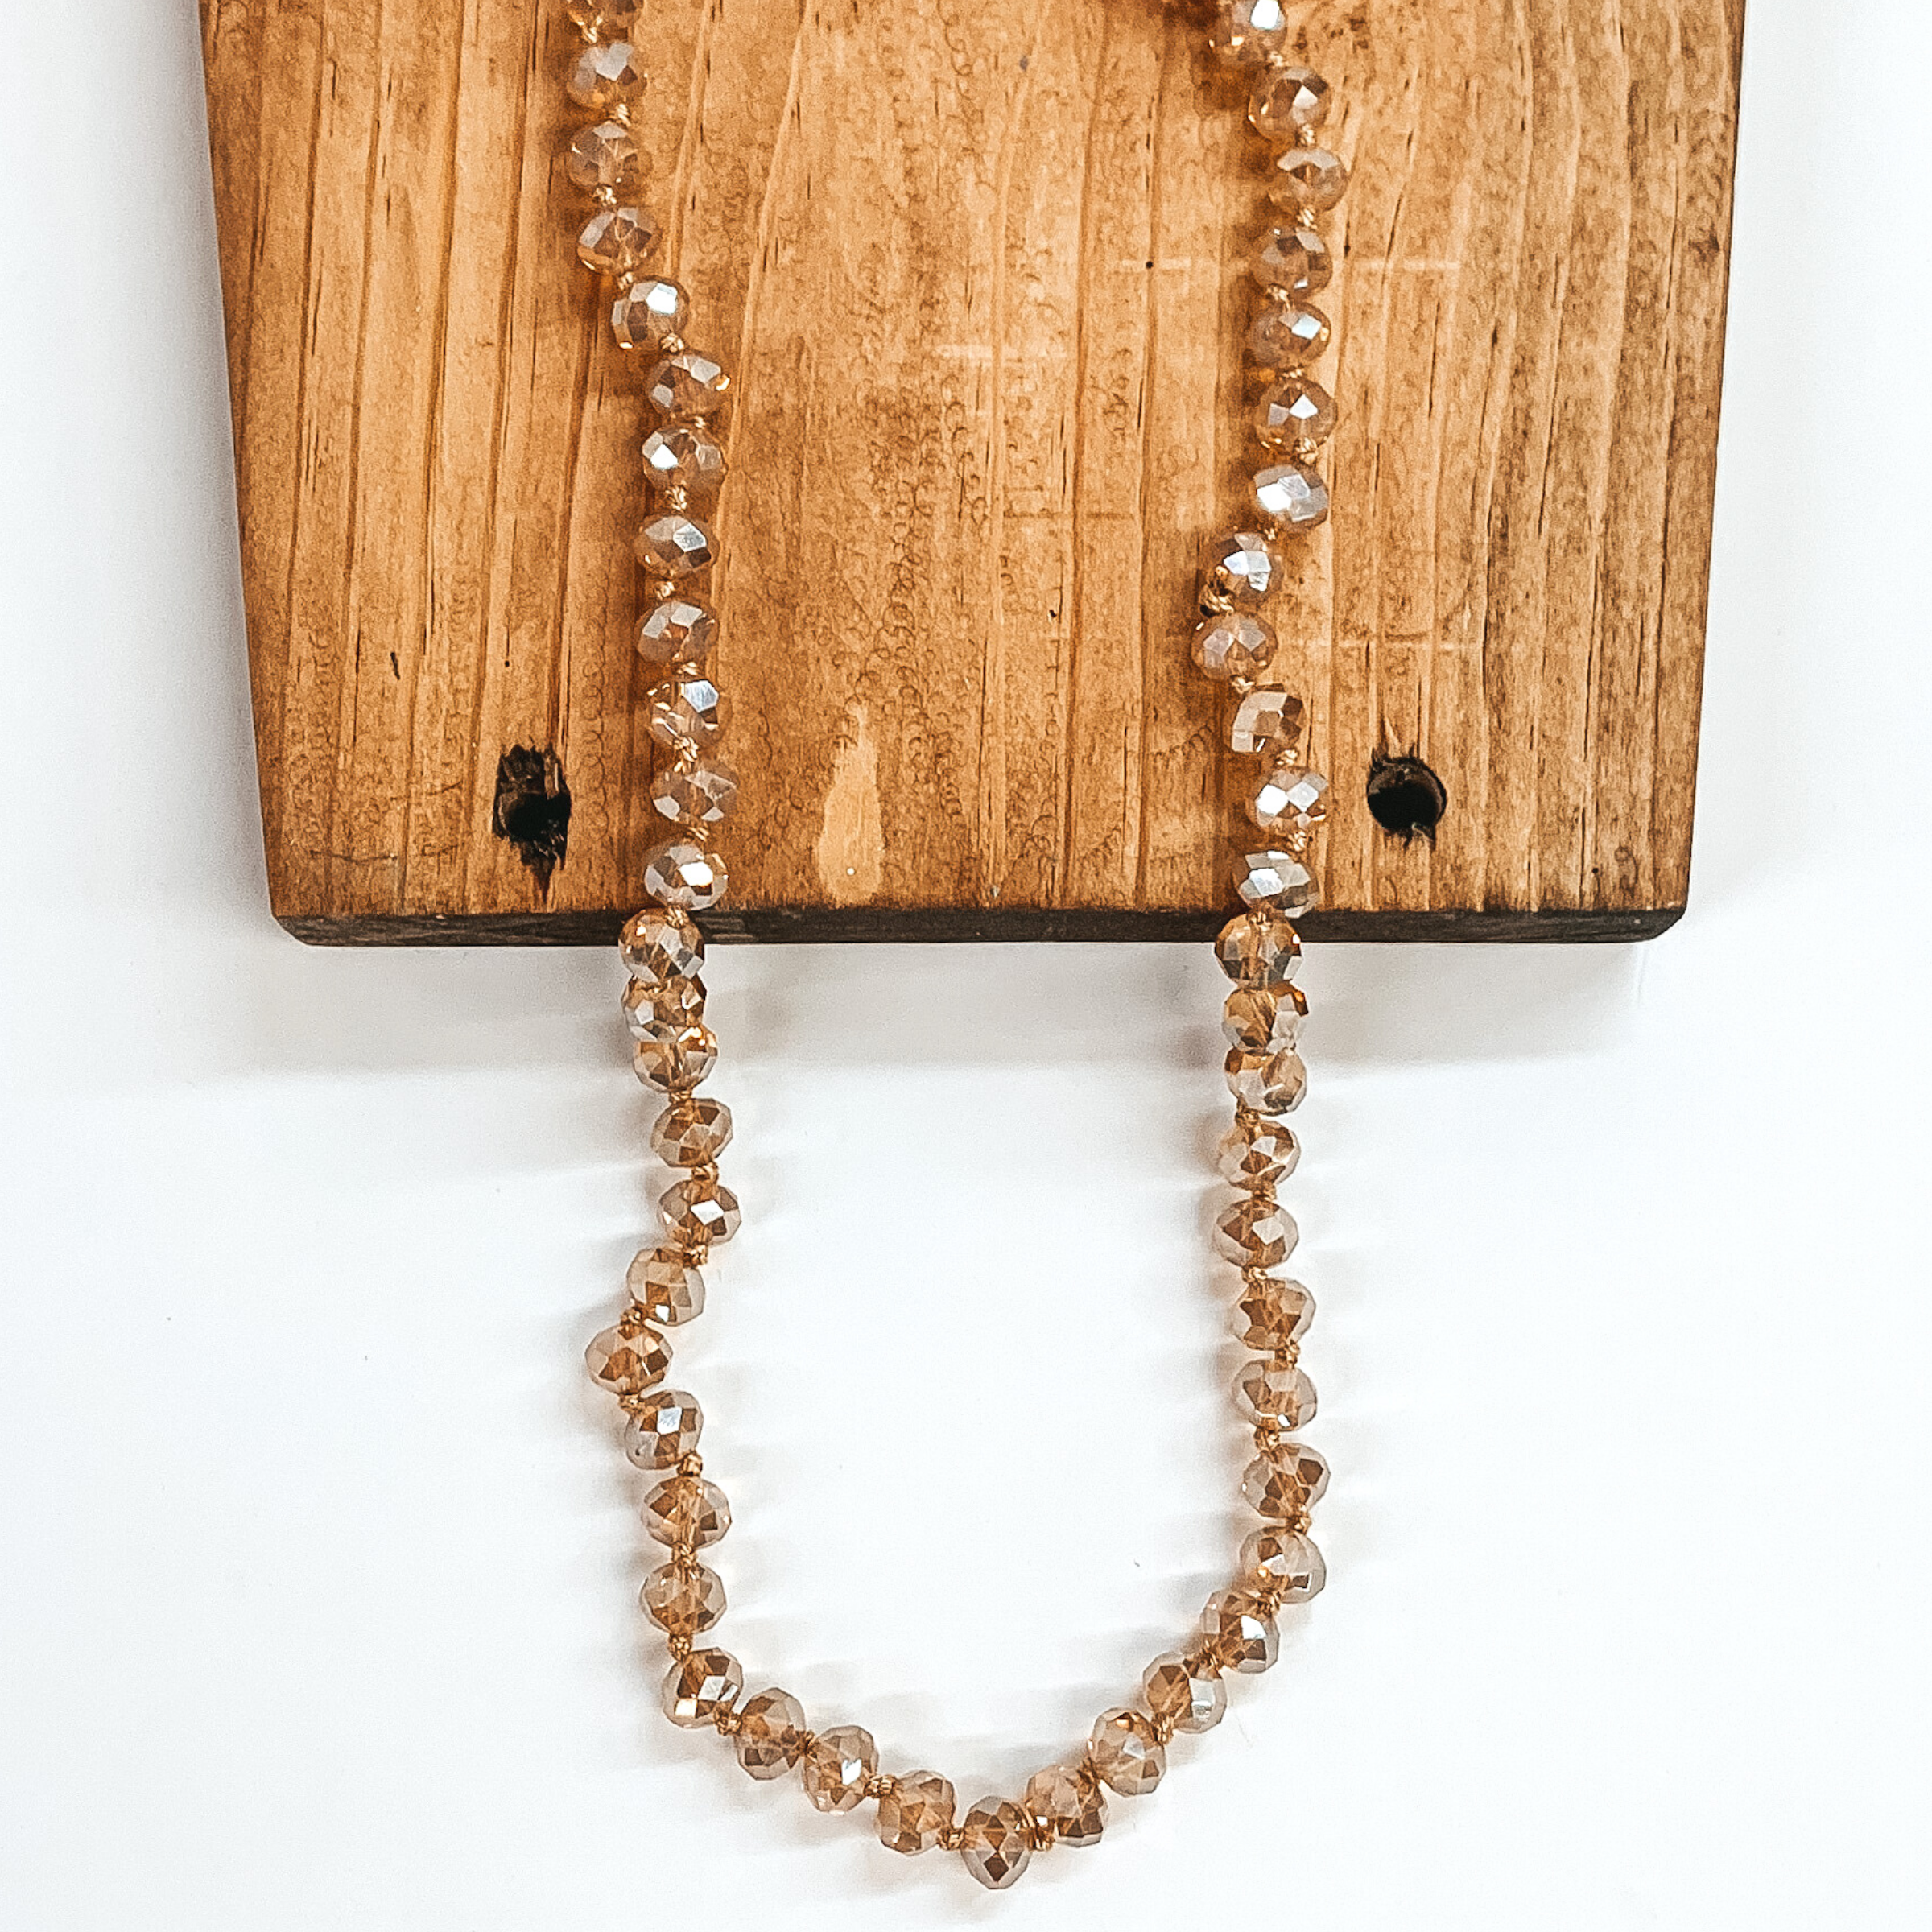 Tan crystal beaded necklace. This necklace is pictured partially laying on a brown block on a white background. 